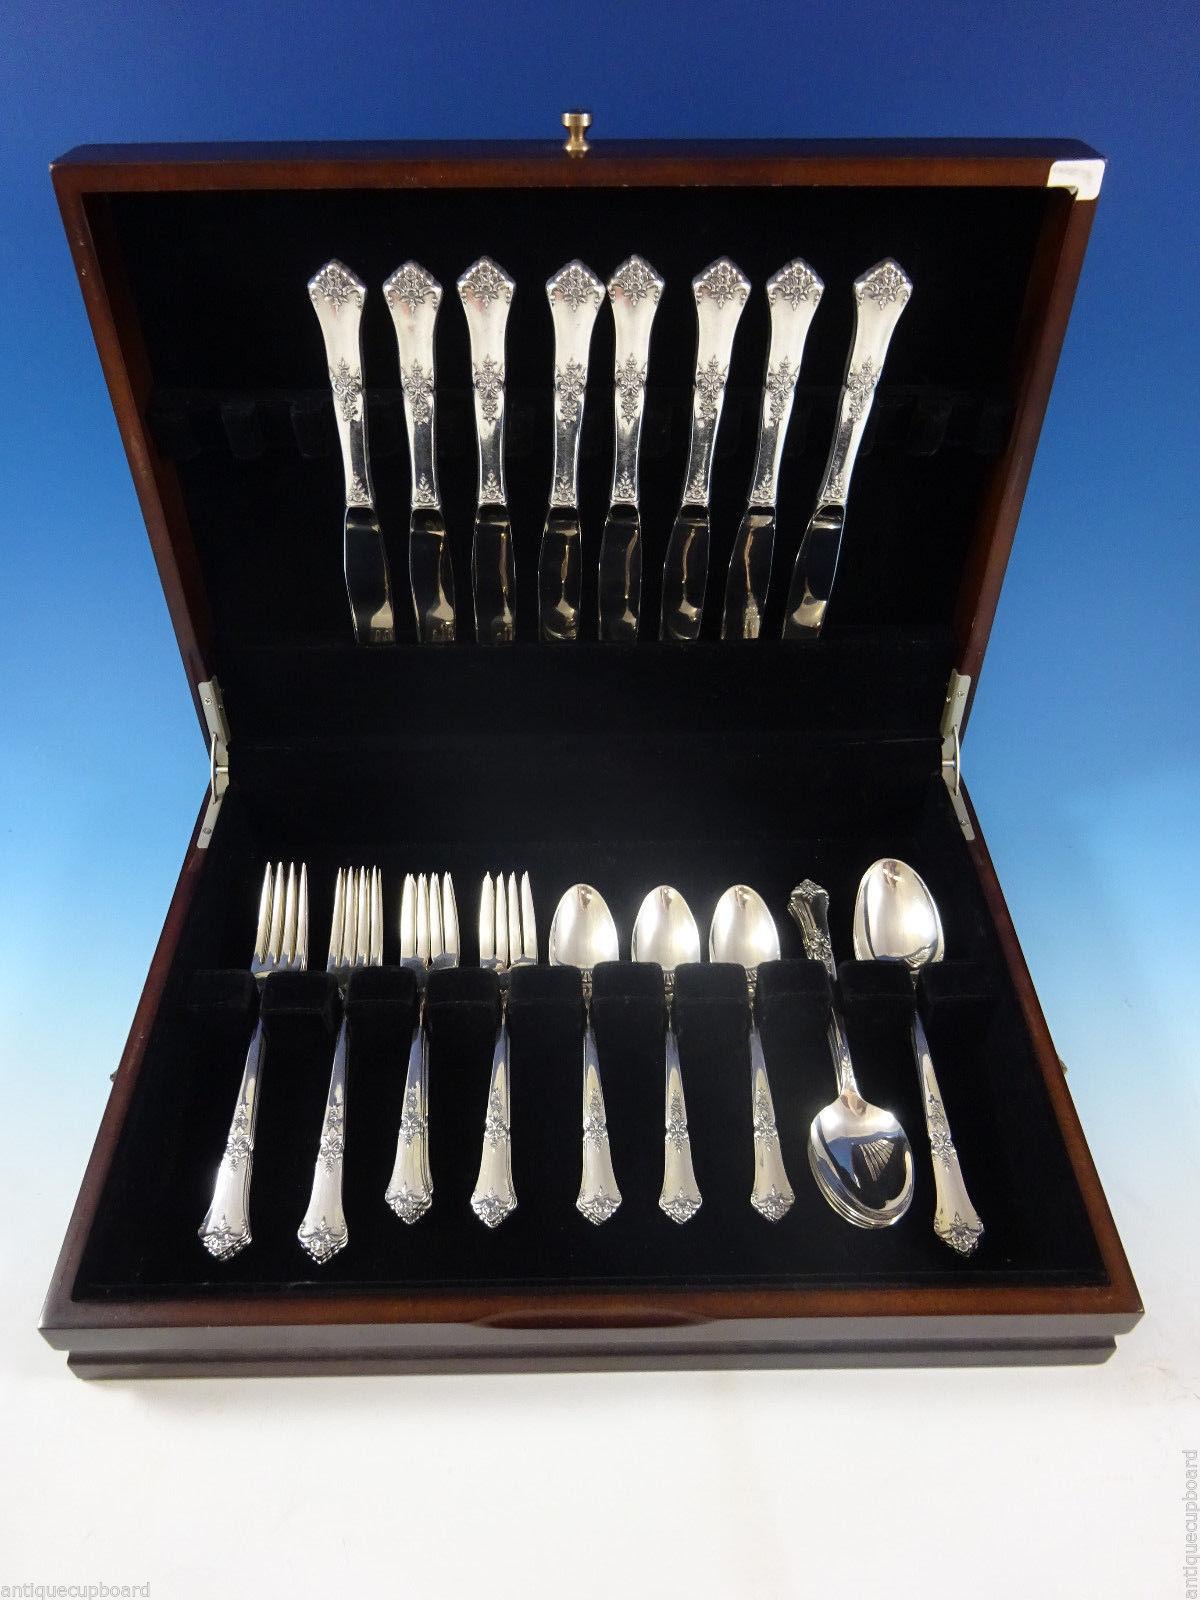 Stately by State House sterling silver flatware set - 40 pieces. This set includes:

8 knives, 9 1/8